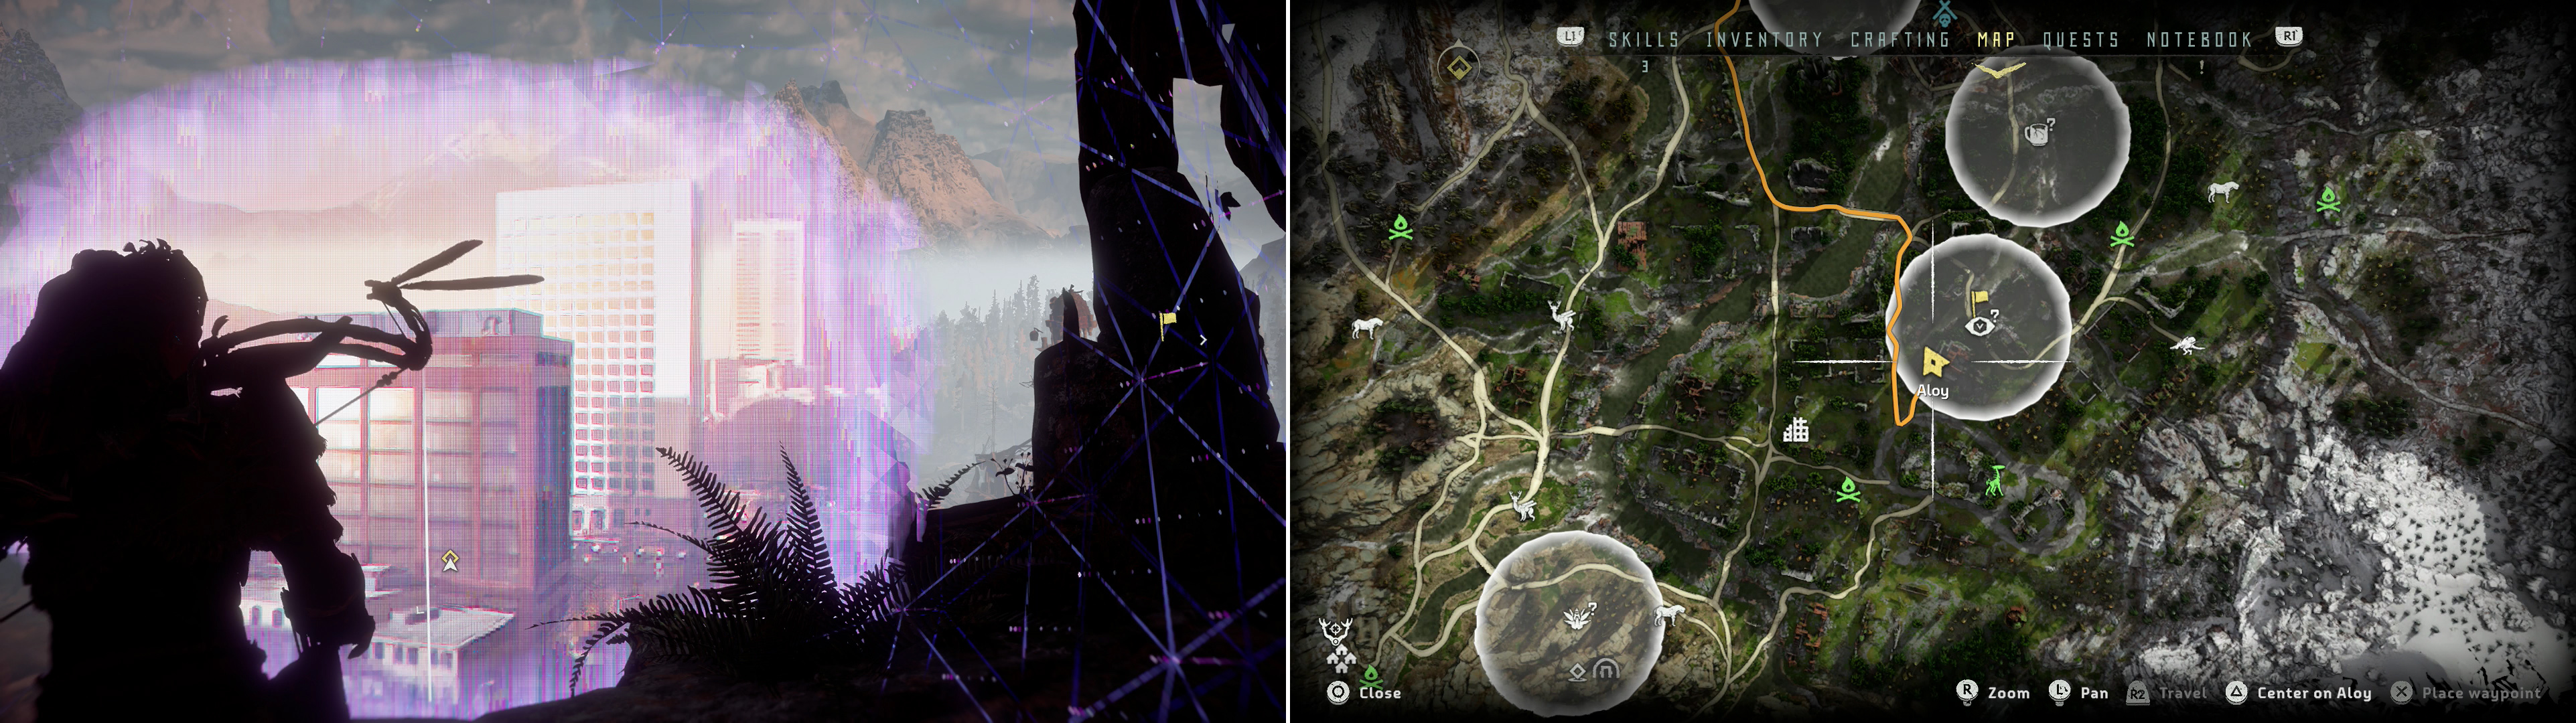 Climb some ruins to find the Vantage - Colorado Springs (left), at the indicated location on the map (right).